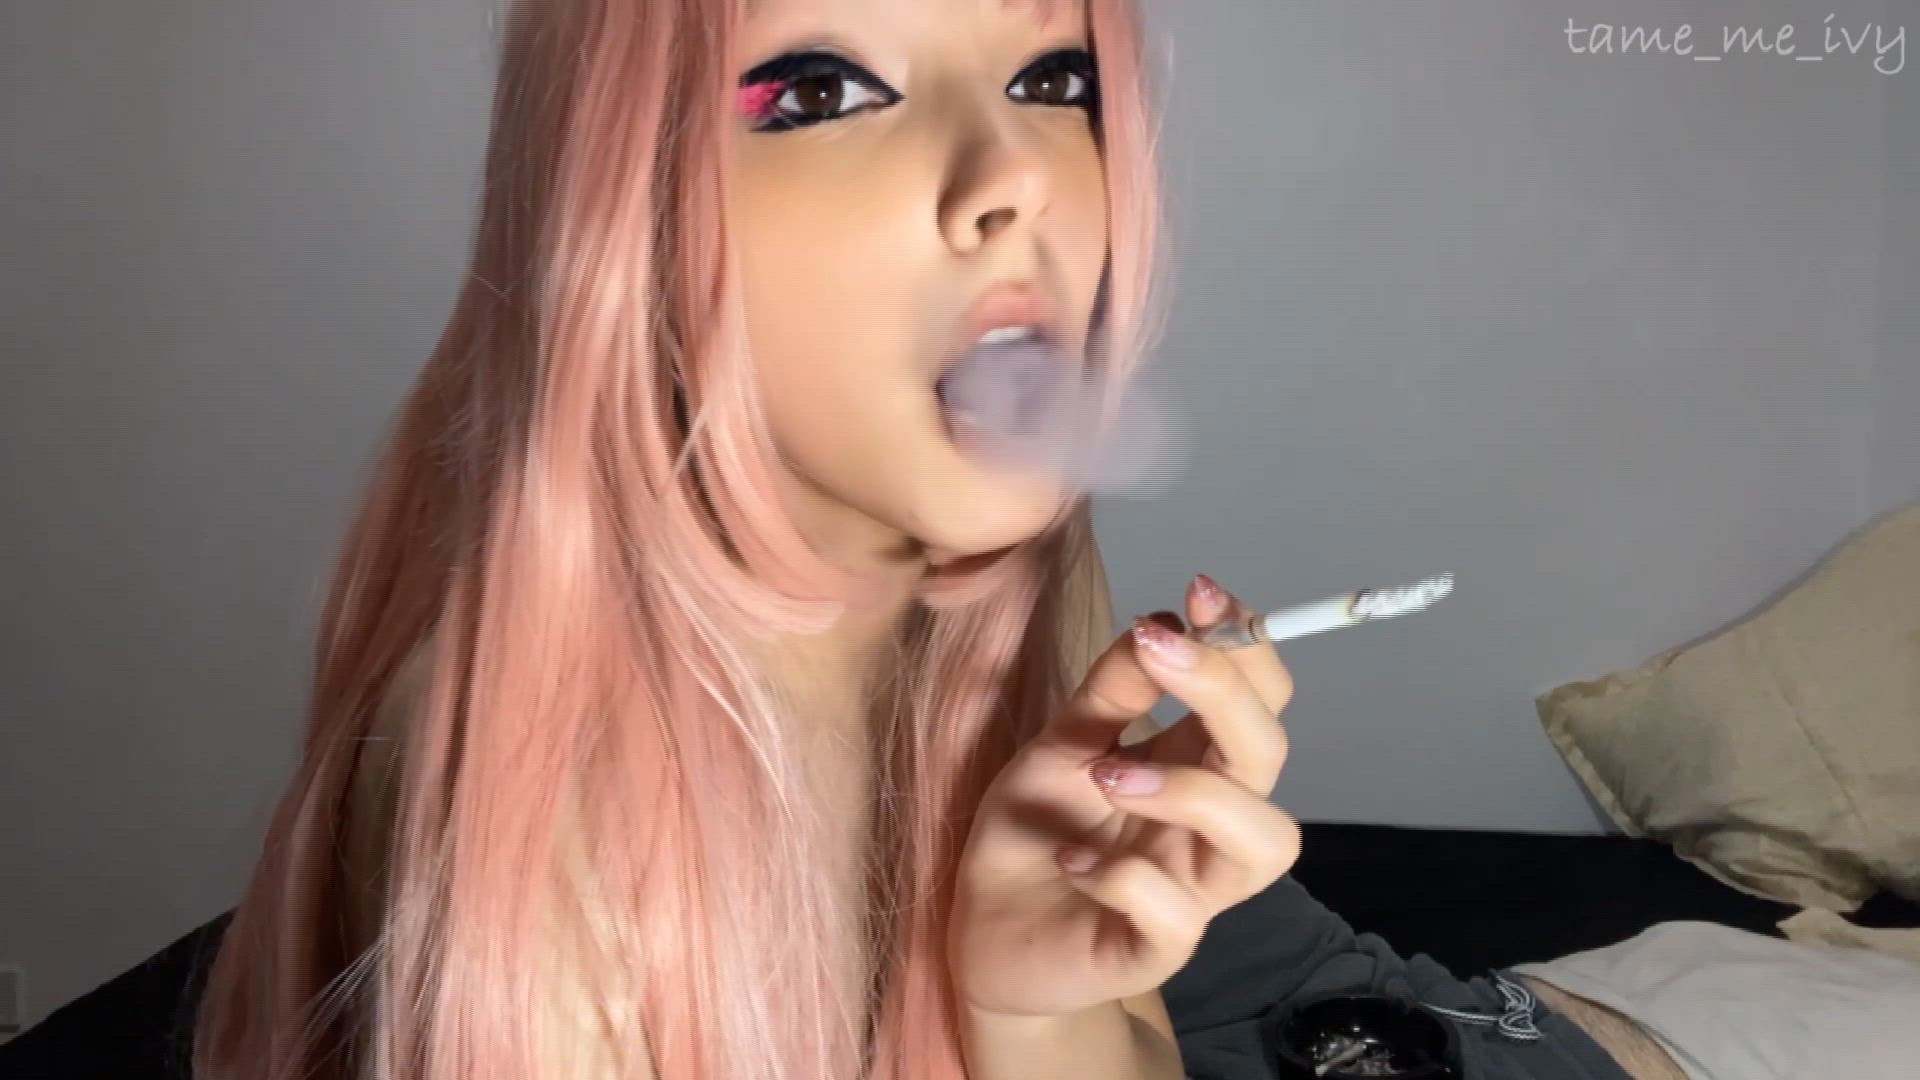 Alt porn video with onlyfans model puwussycat <strong>@smokemeivy</strong>